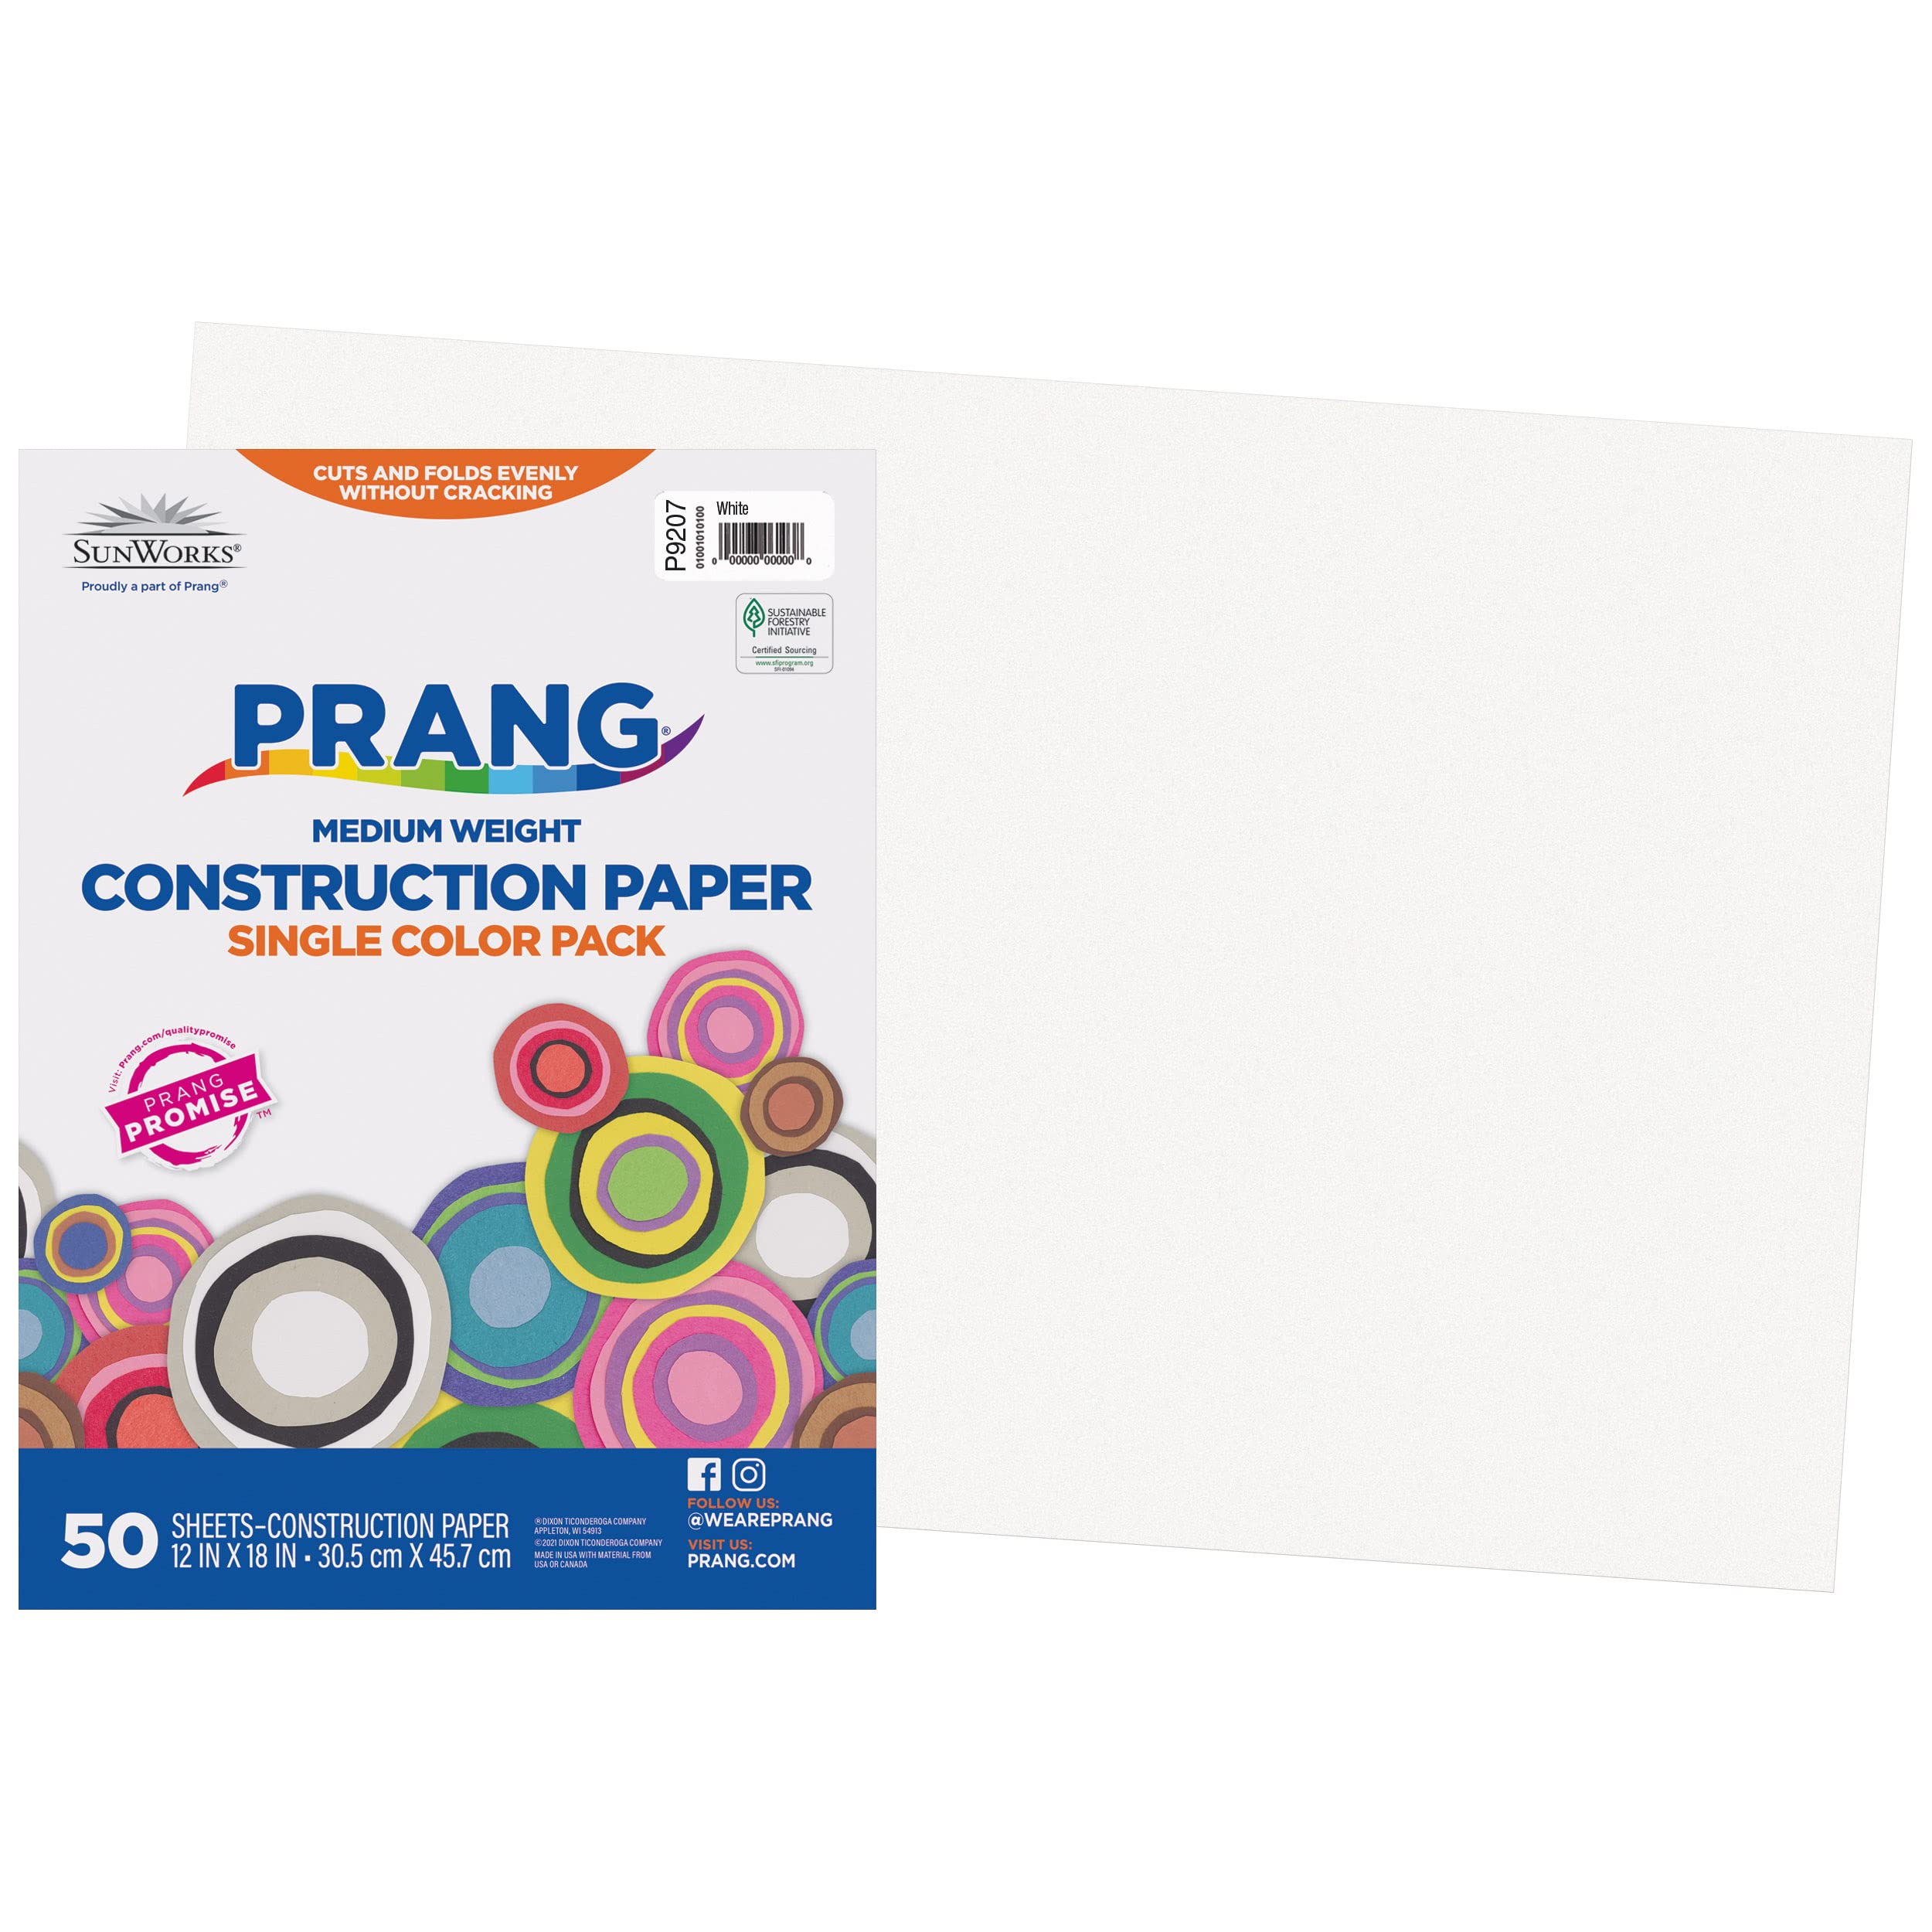 Tru-Ray Construction Paper 12 X 18 White, 1 - Foods Co.